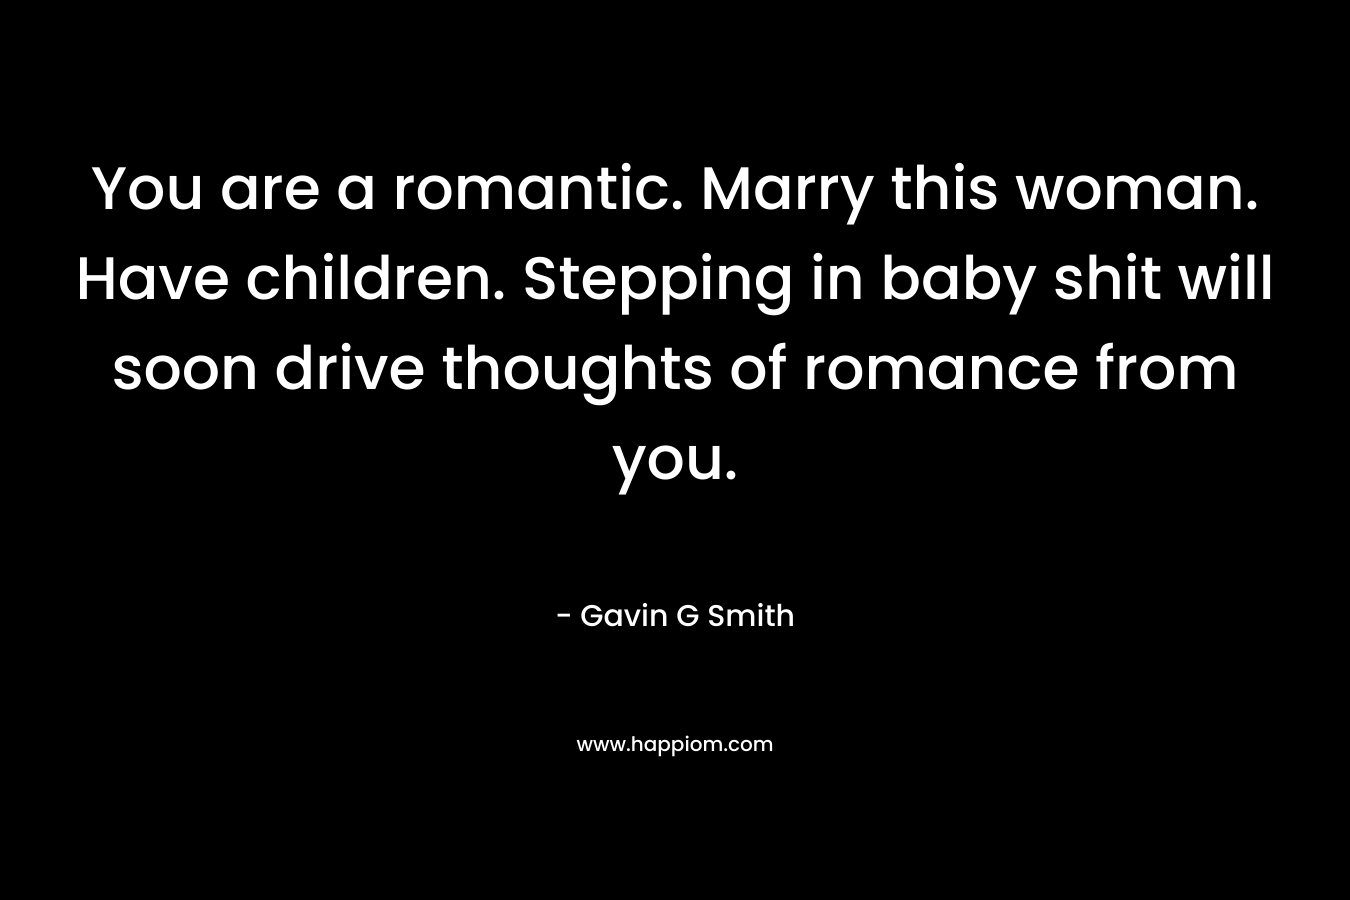 You are a romantic. Marry this woman. Have children. Stepping in baby shit will soon drive thoughts of romance from you. – Gavin G Smith